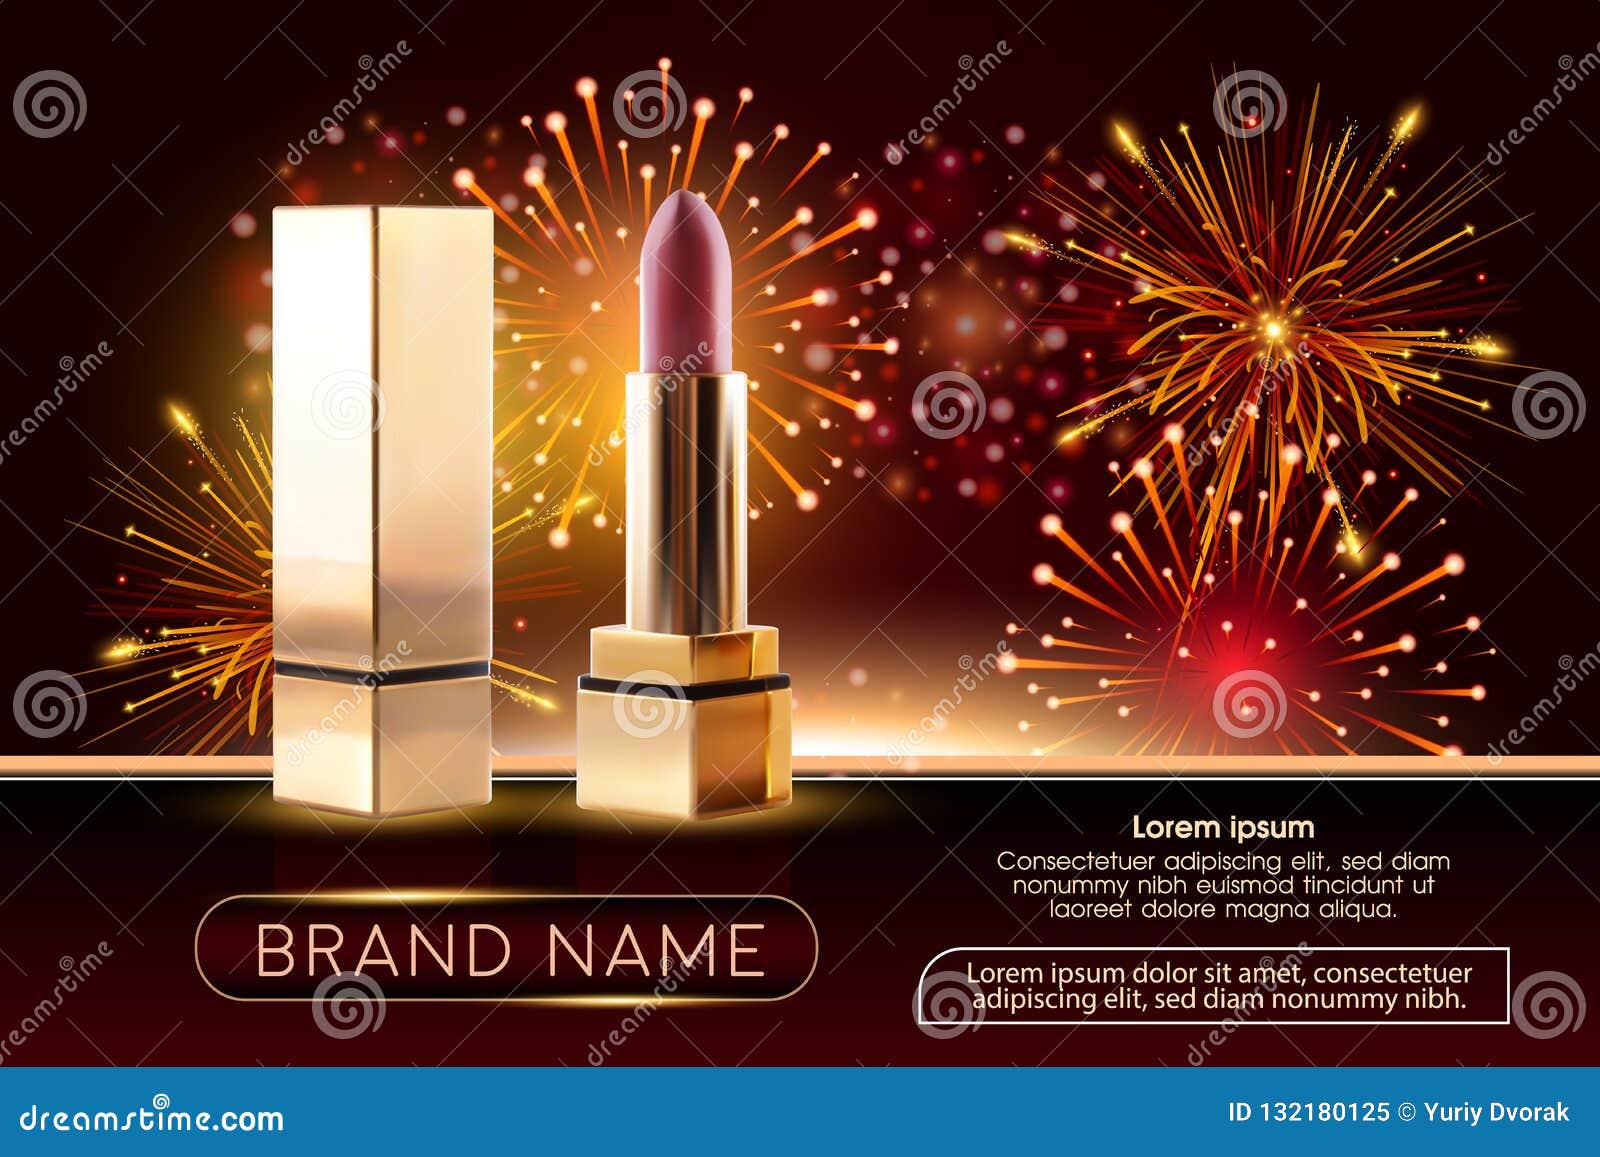 Download Makeup Ads Template Charming Red Lipstick Mockup With Sparkling Background Package Design Promotion Product Cosmetics Stock Vector Illustration Of Effect Artistic 132180125